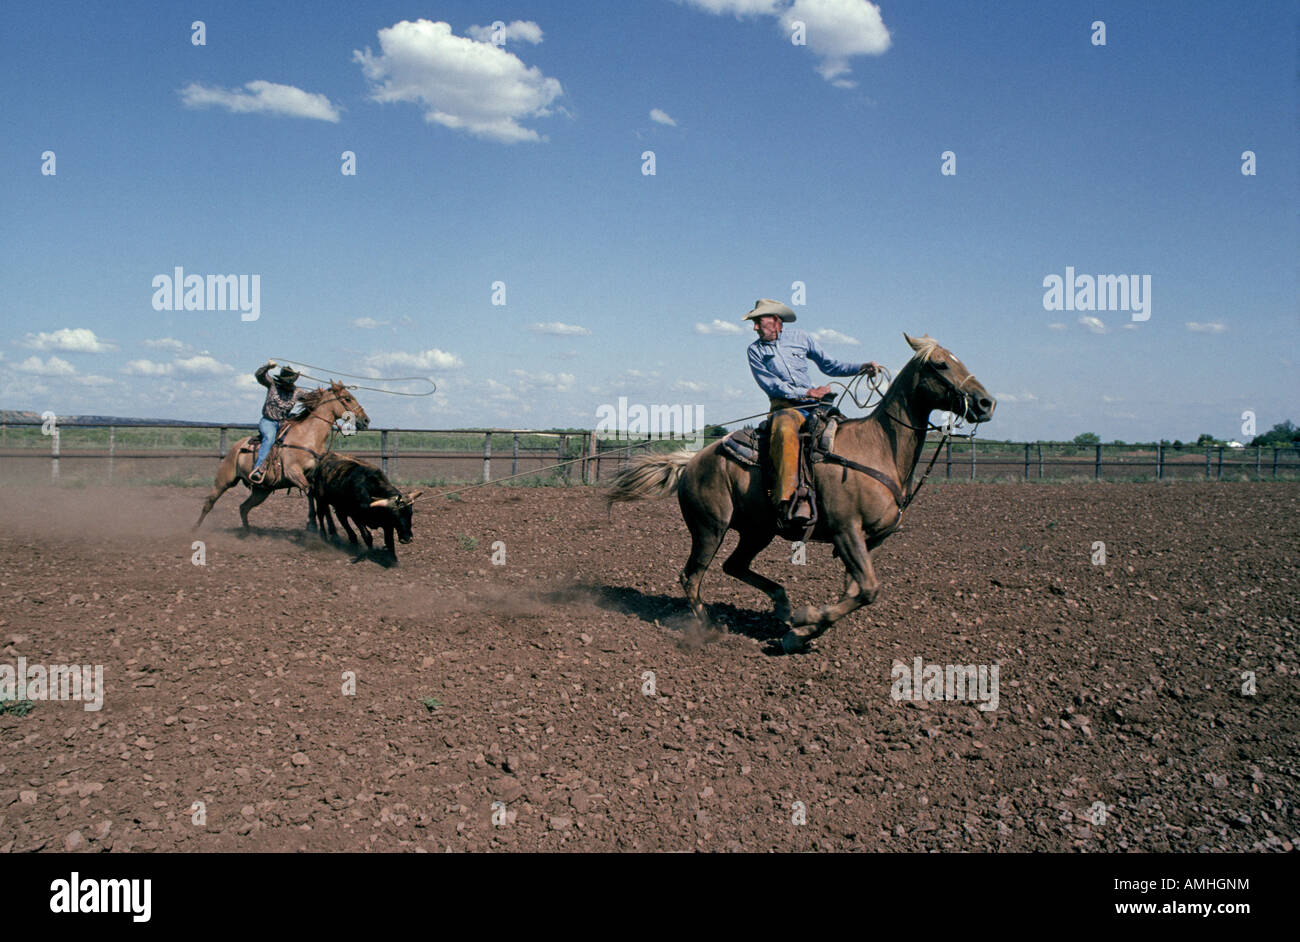 USA TEXAS Two cowboys practice roping steers on a large cattle ranch near Post Texas in the Texas panhandle Stock Photo